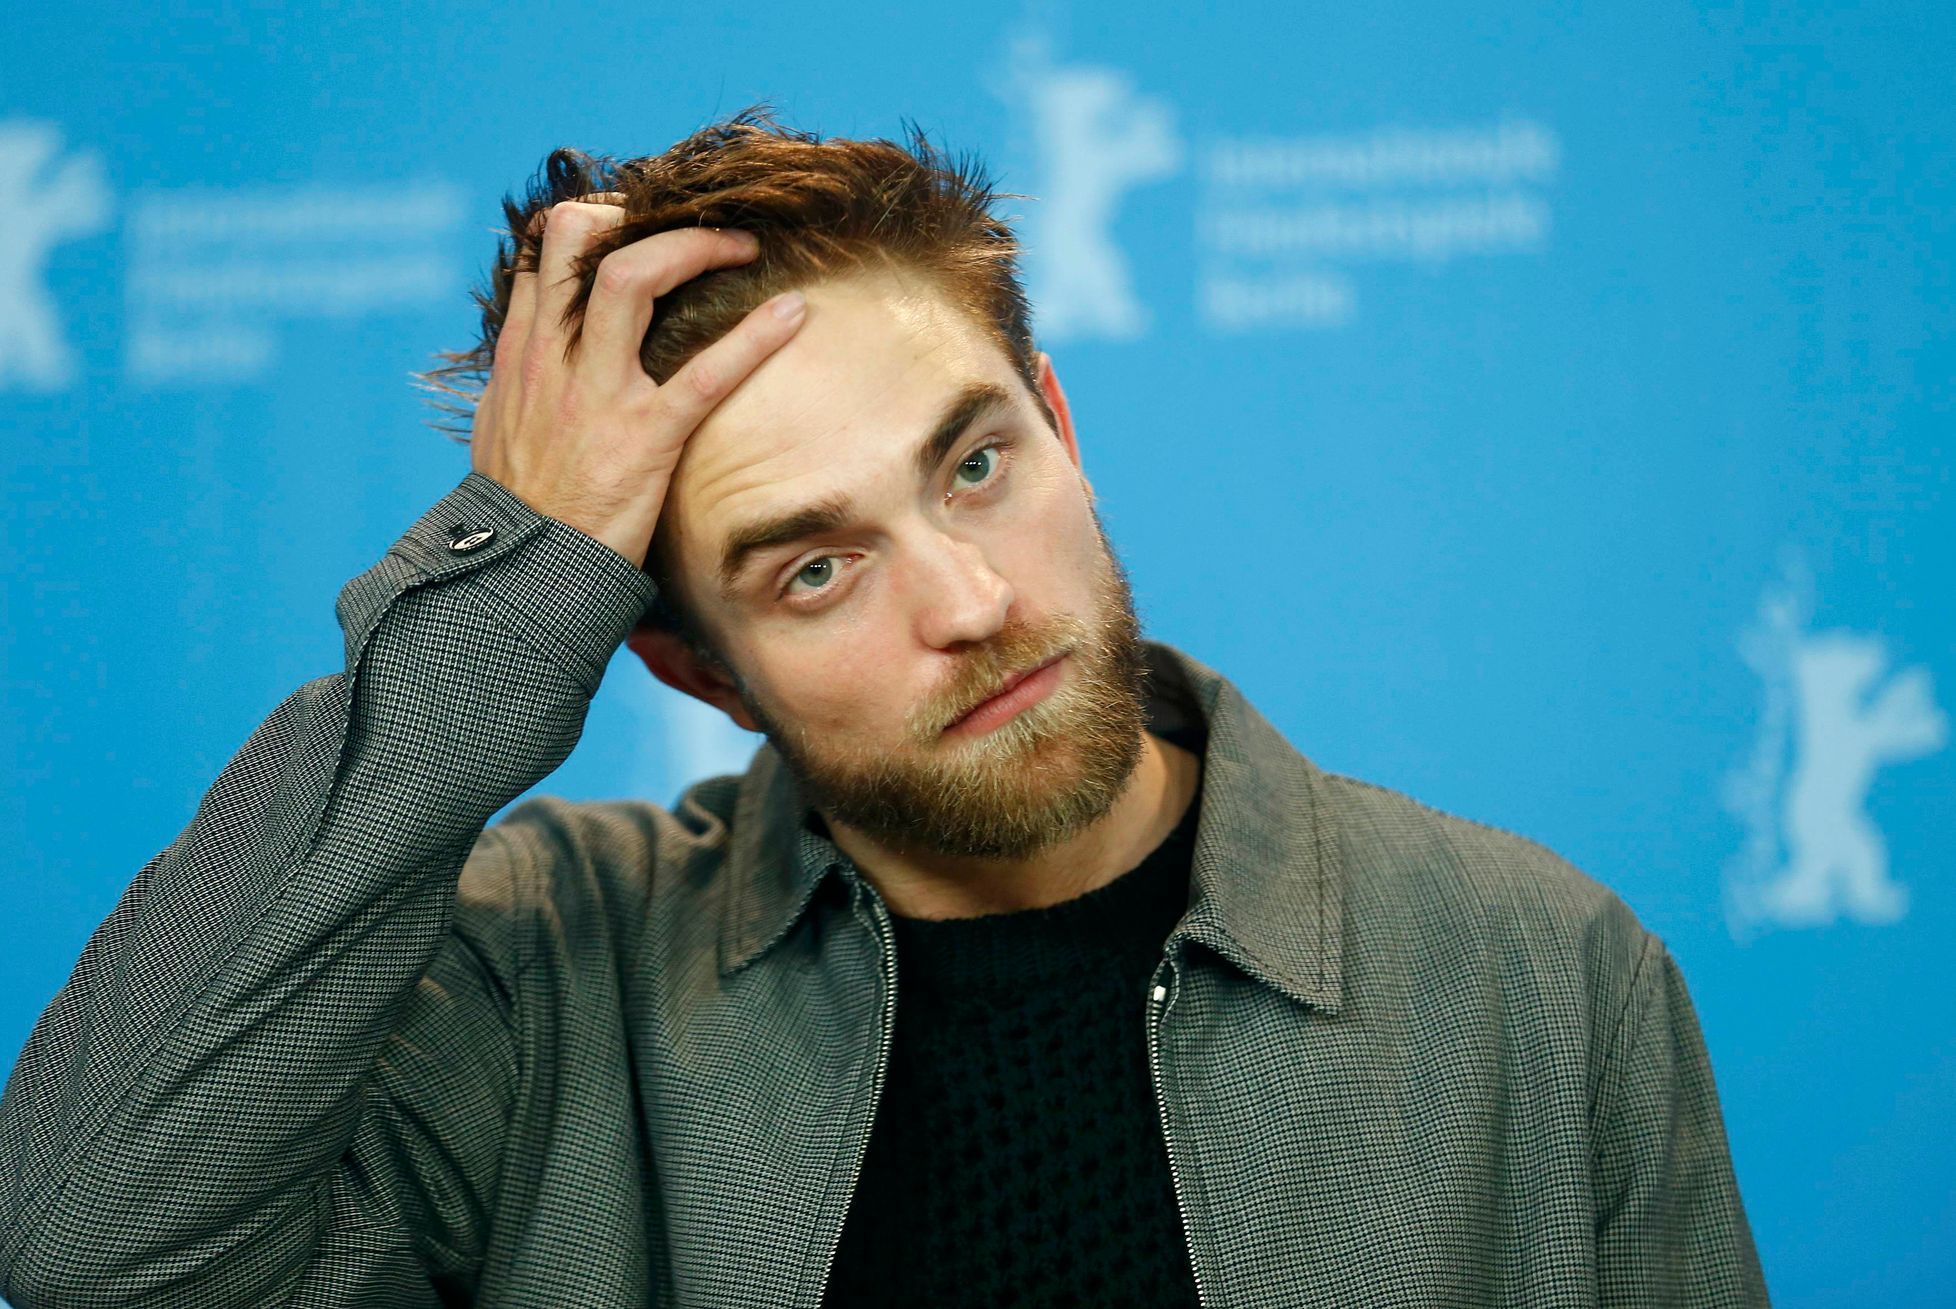 Actor Robert Pattinson poses during photocall at 65th Berlinale International Film Festival in Berlin